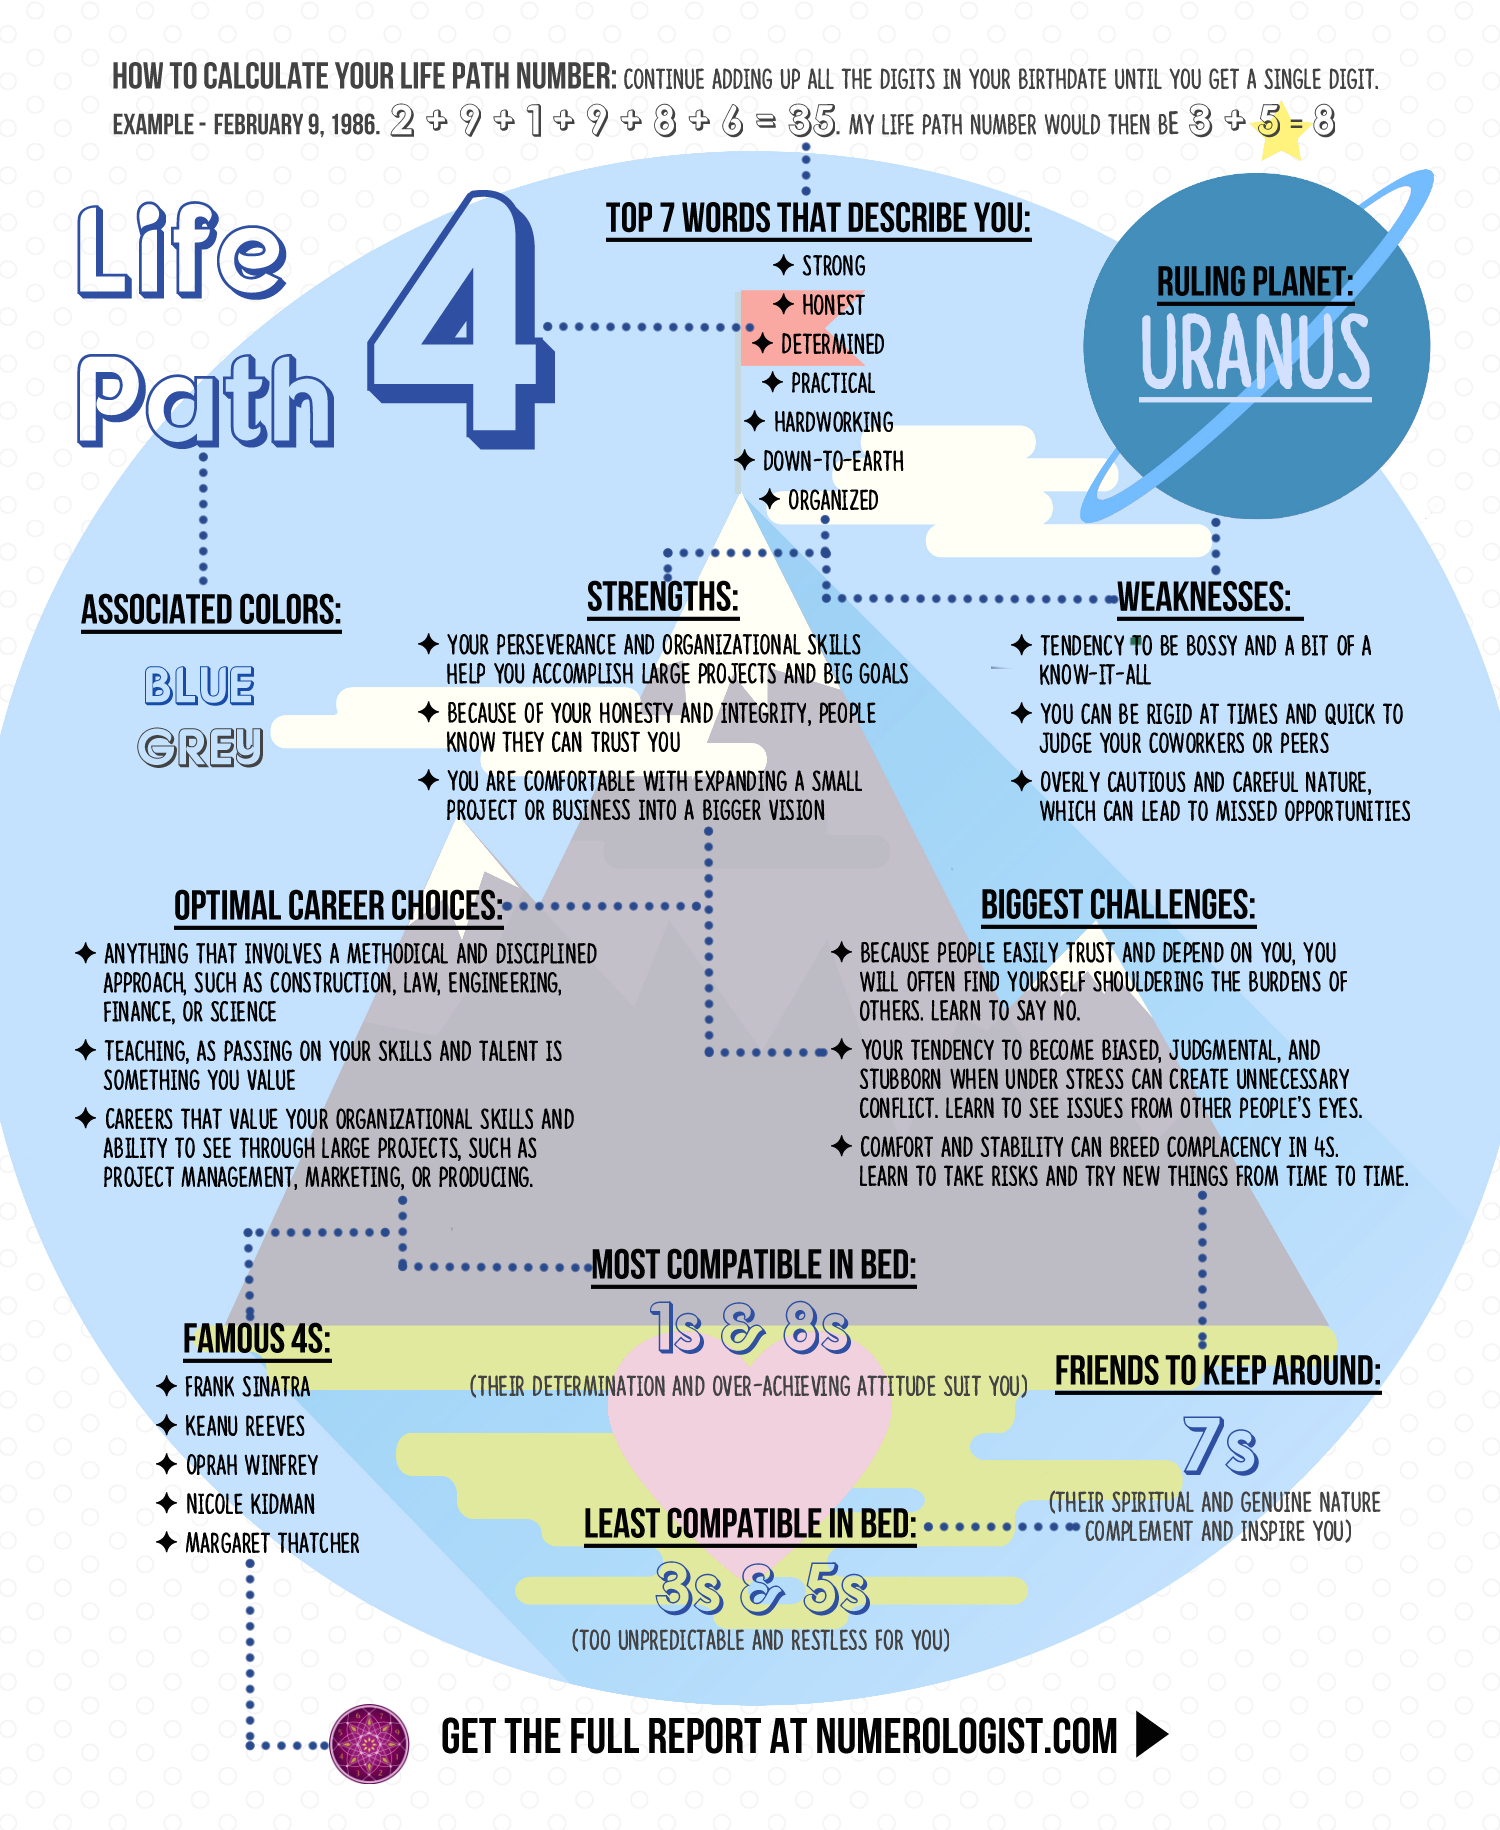 life path 11 meaning